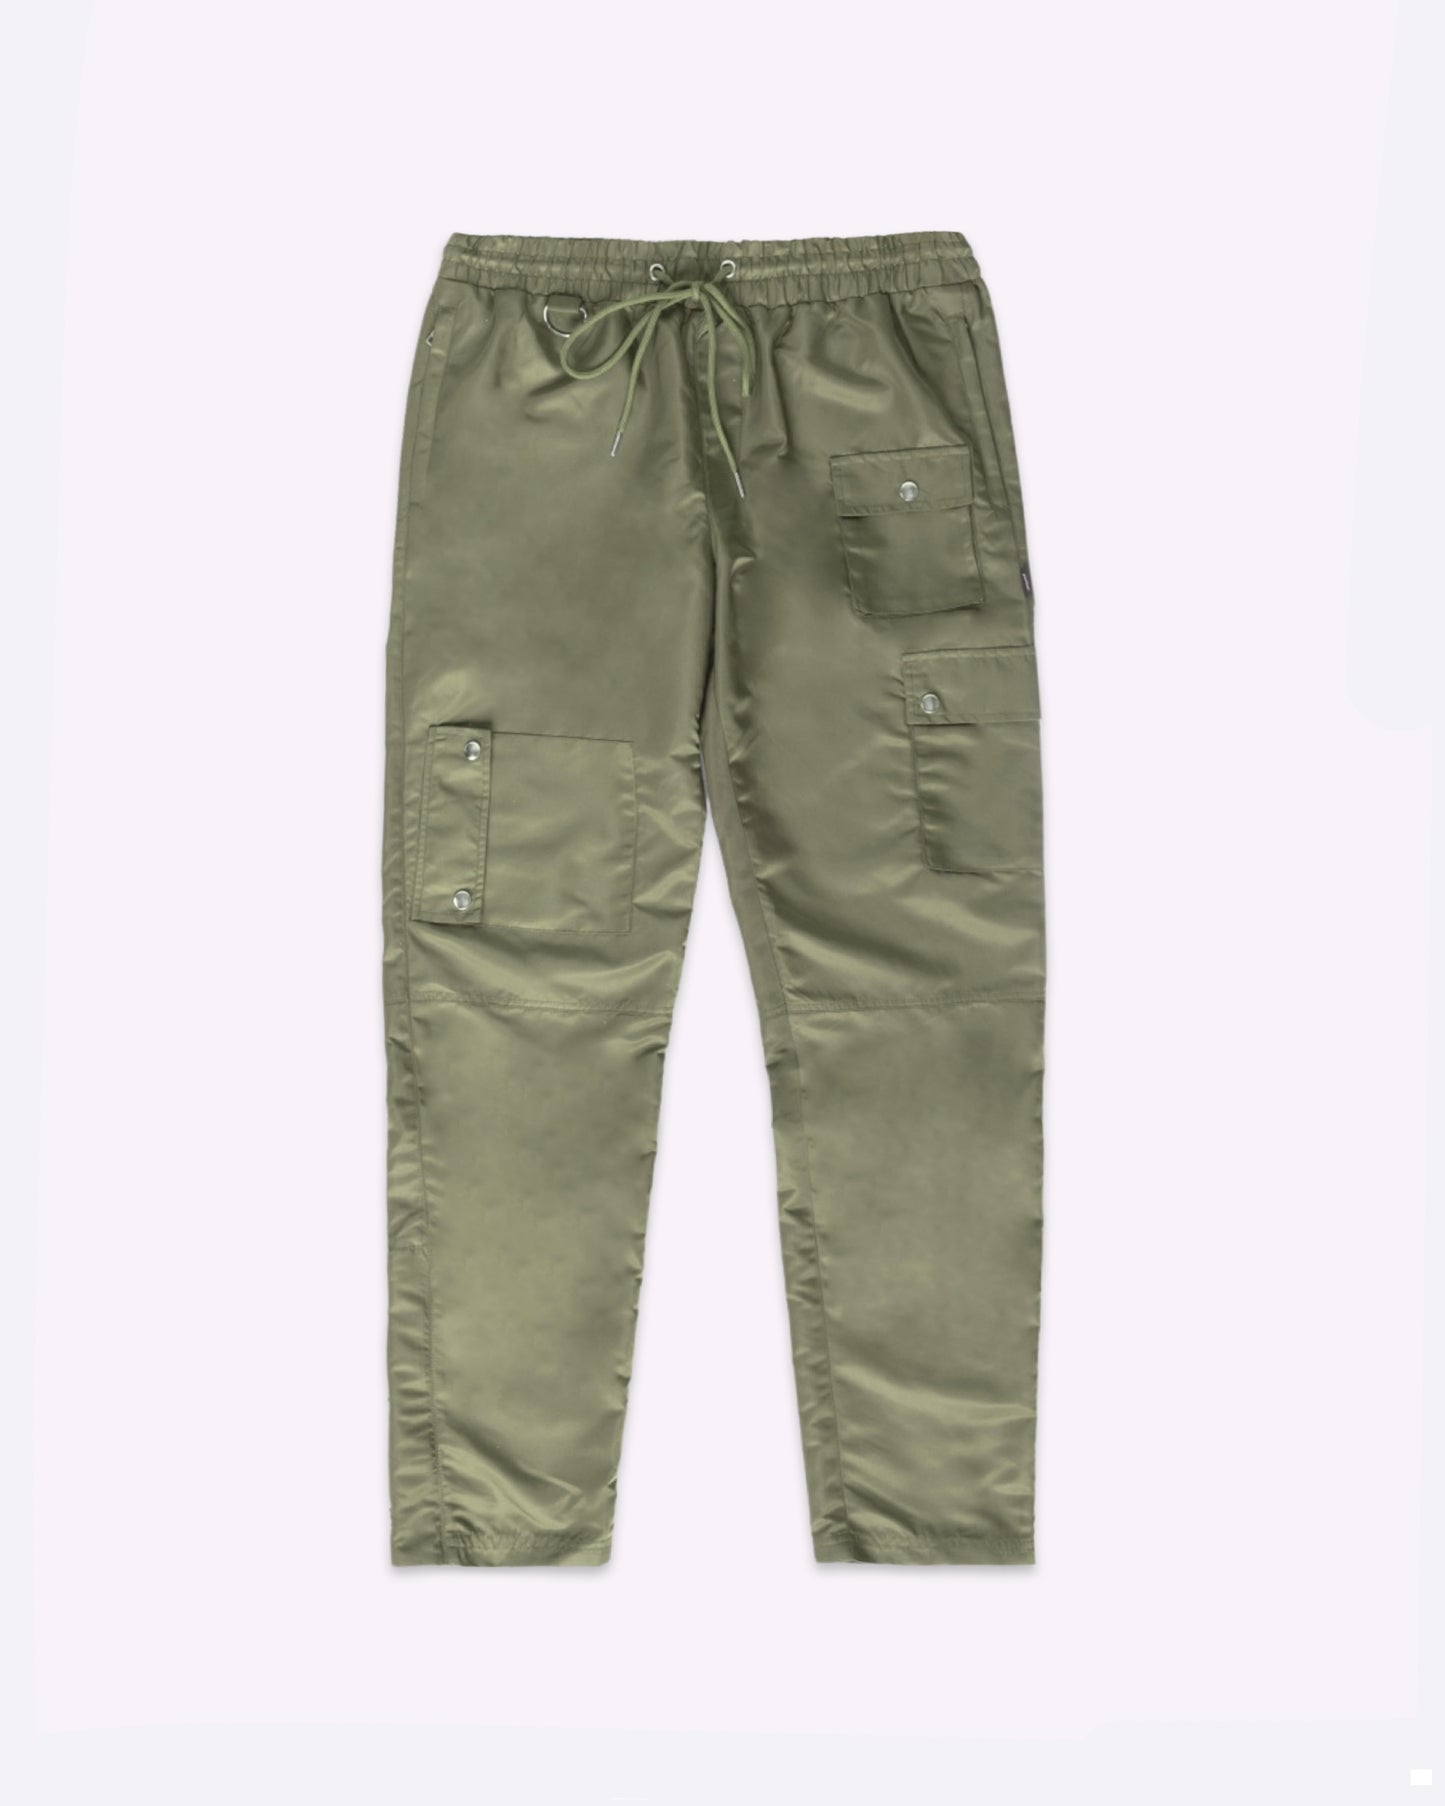 EPTM ROVER UTILITY PANTS- OLIVE